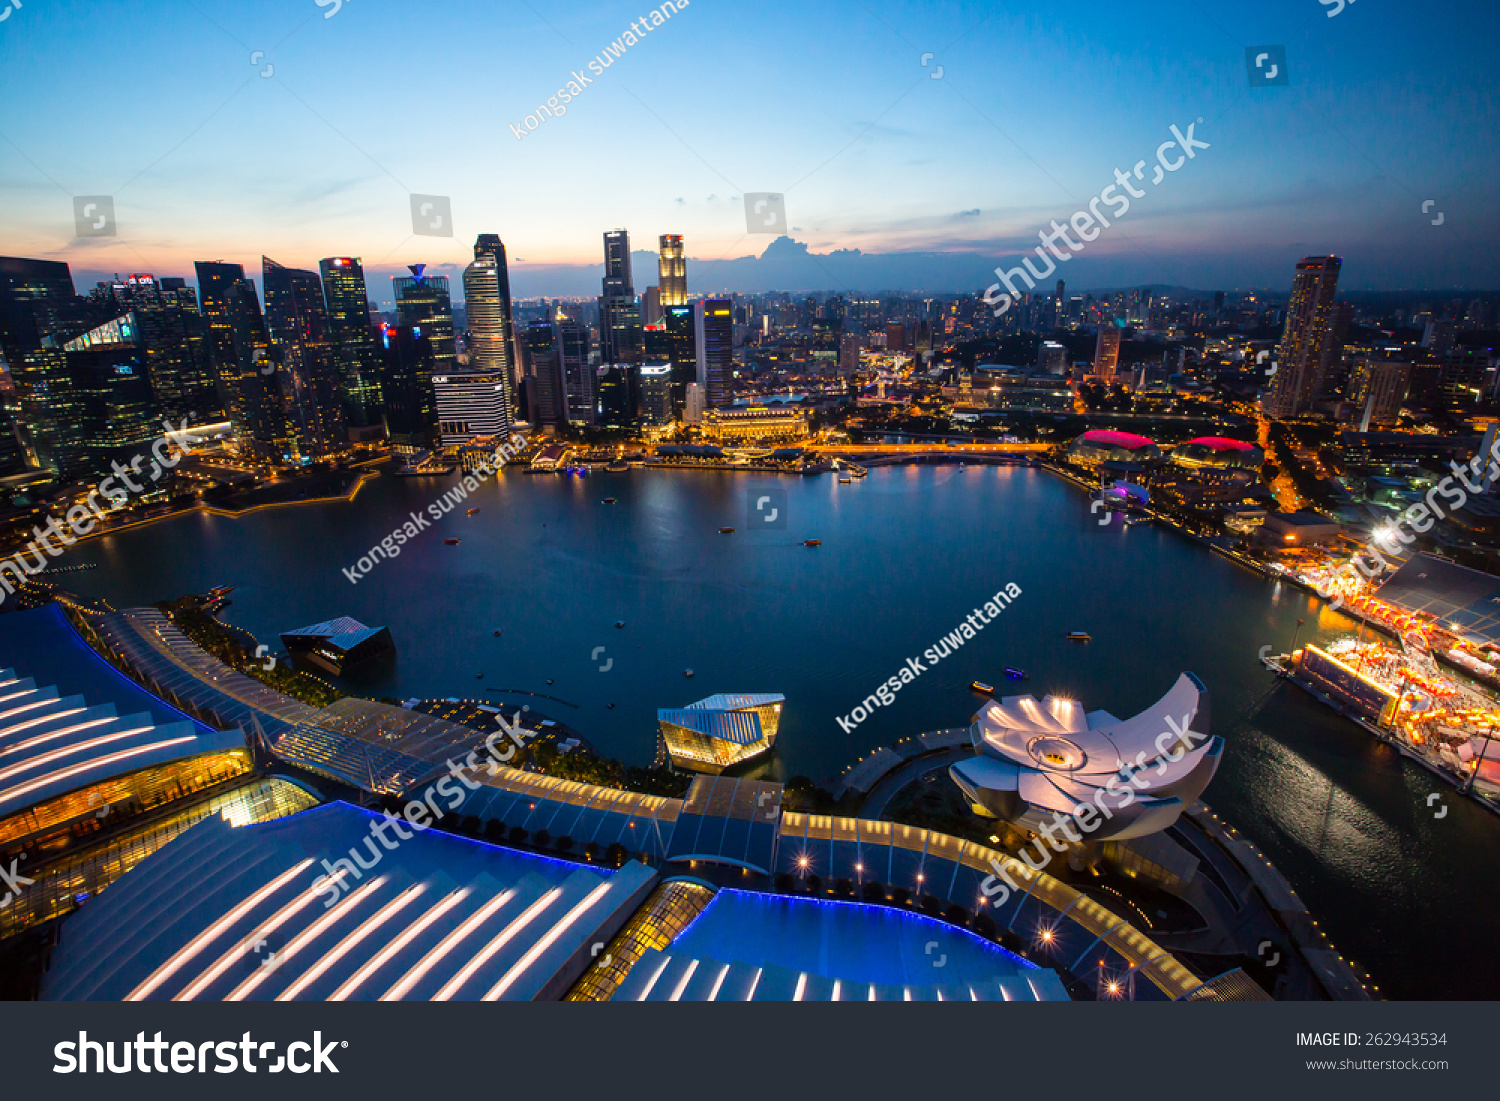 MARINA BAY, SINGAPORE - FEBRUARY 28, 2015: What travelers do not miss when visit to Singapore is watching the city from the top view at the central business area of Singapore.  #262943534